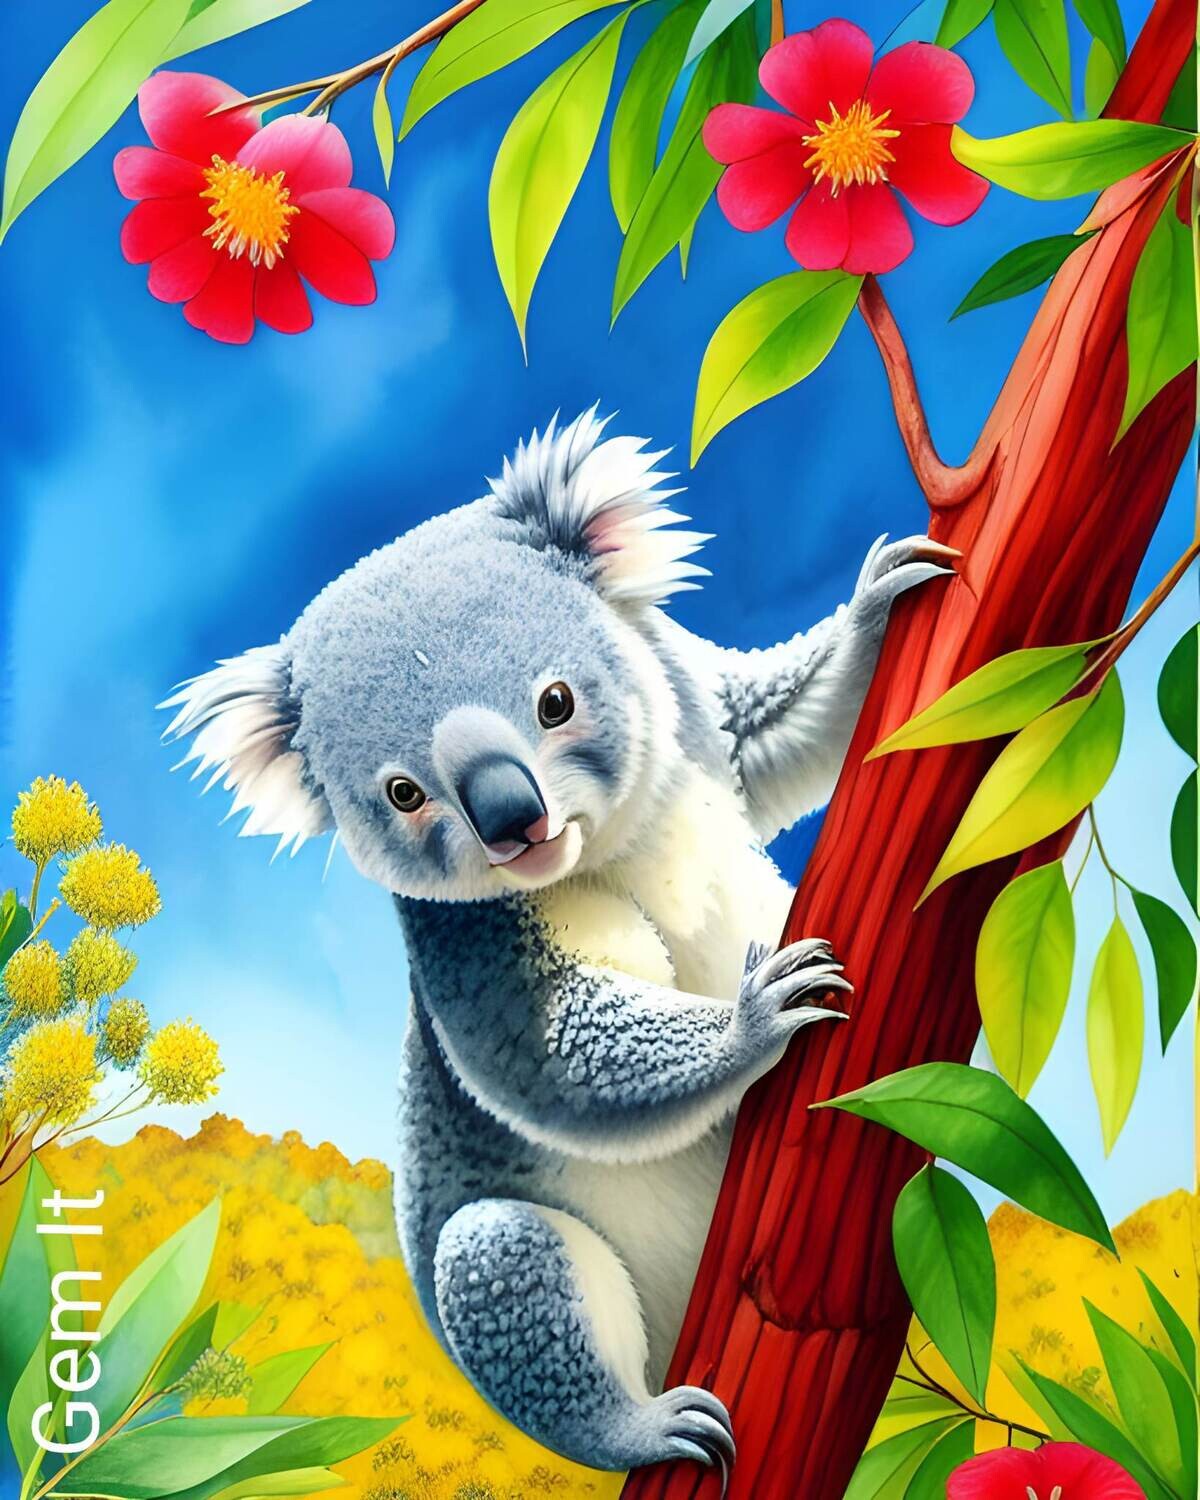 Cute Koala - Specially ordered for you. Delivery is approximately 4 - 6 weeks.